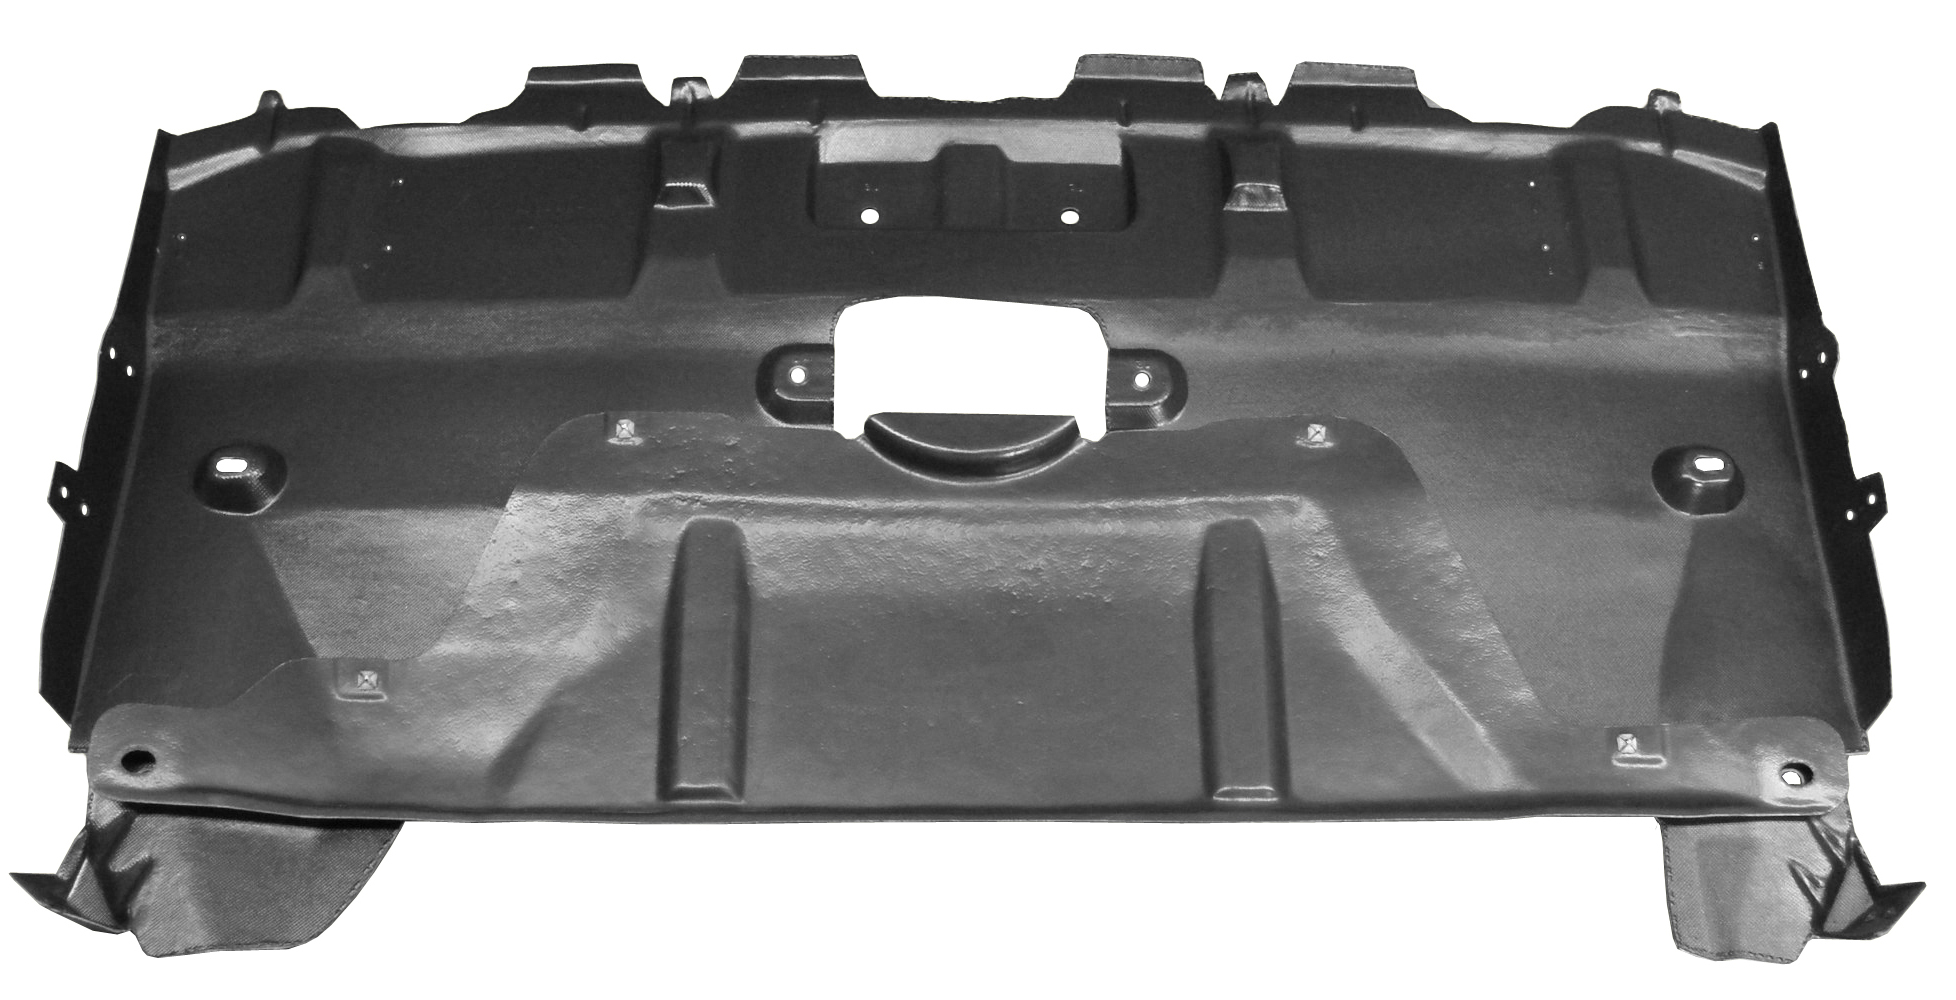 Aftermarket UNDER ENGINE COVERS for SUBARU - LEGACY, LEGACY,10-13,Lower engine cover